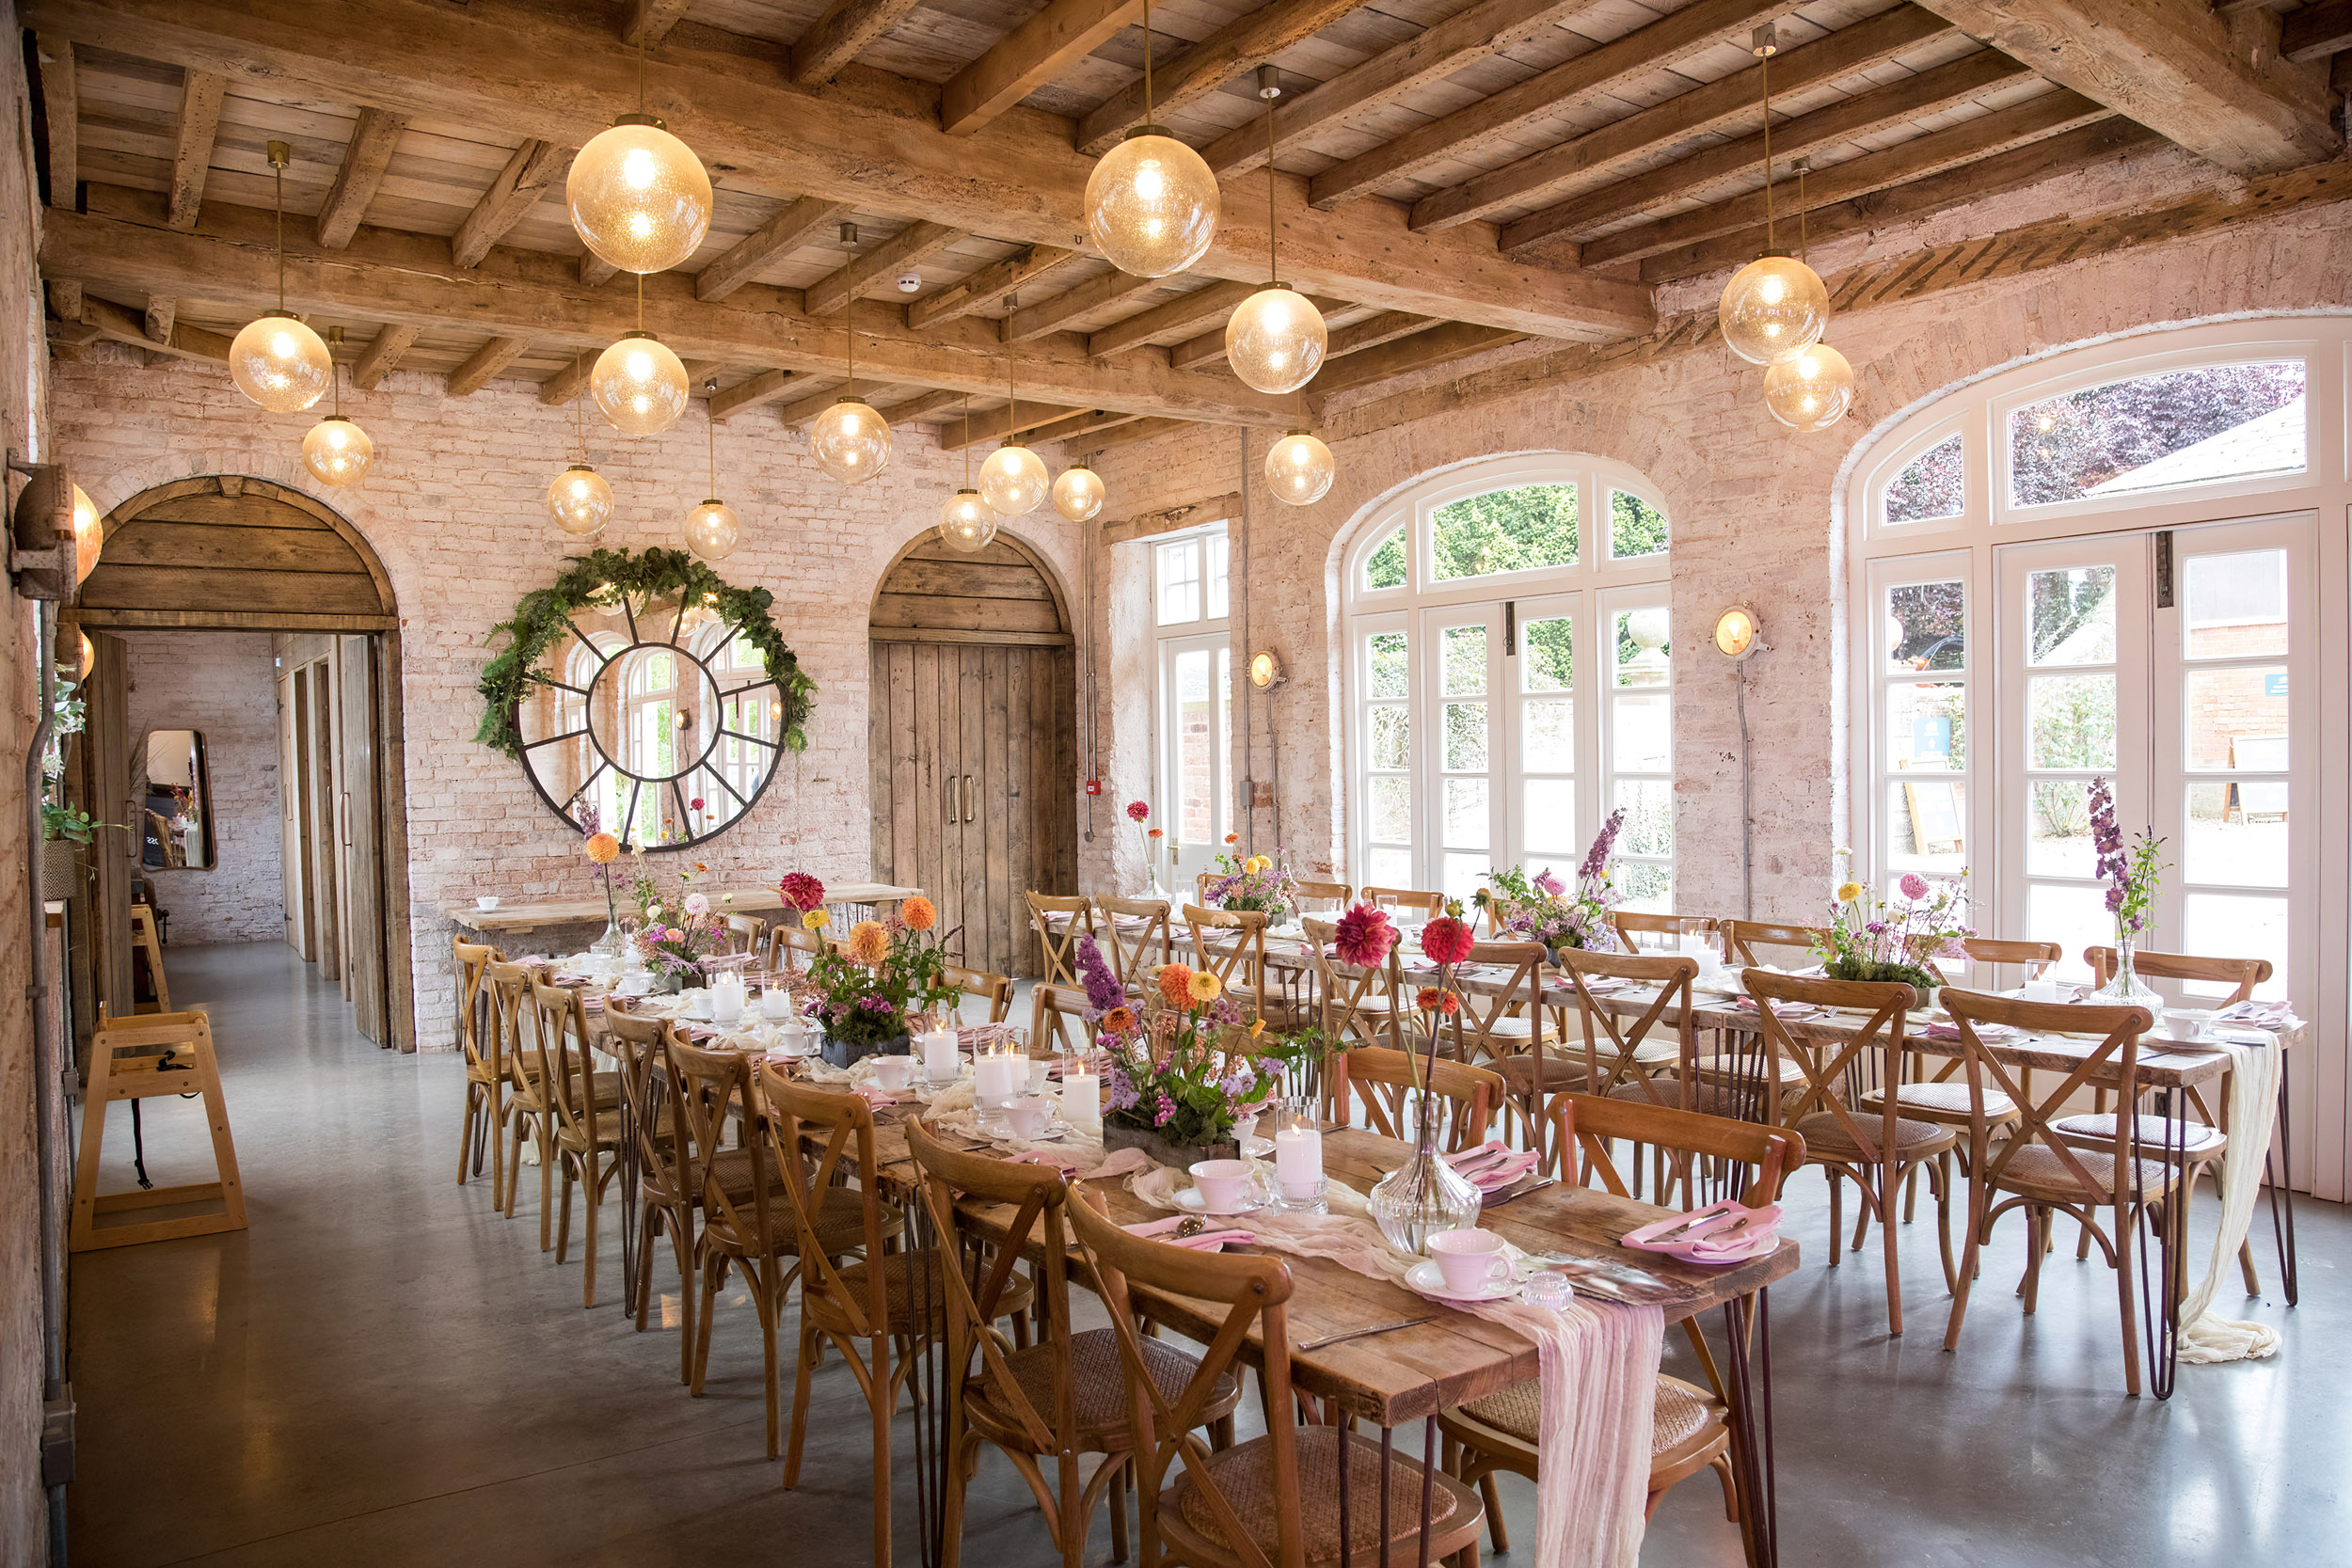 A view of two rows of trestle tables laid out for a wedding reception in a rustic exposed brick wall room with exposed beams. The tables have small bud vases filled with single stems of dahlias in reds, oranges and yellows